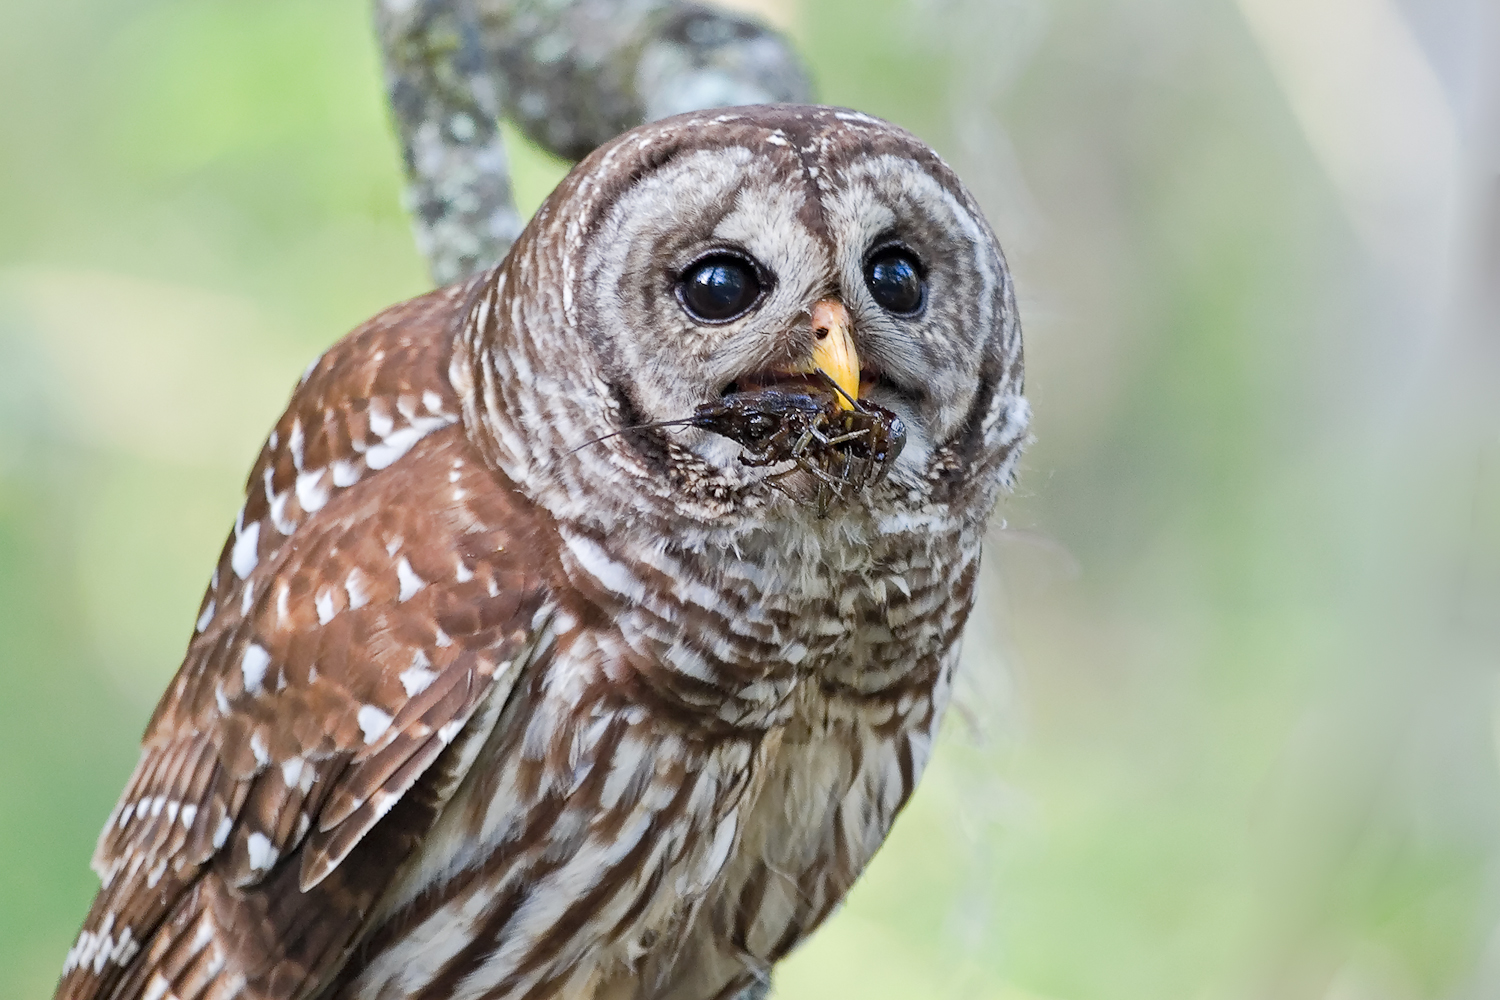 peta-agrees-to-kill-barred-owls-to-protect-spotted-owls-utah-people-s